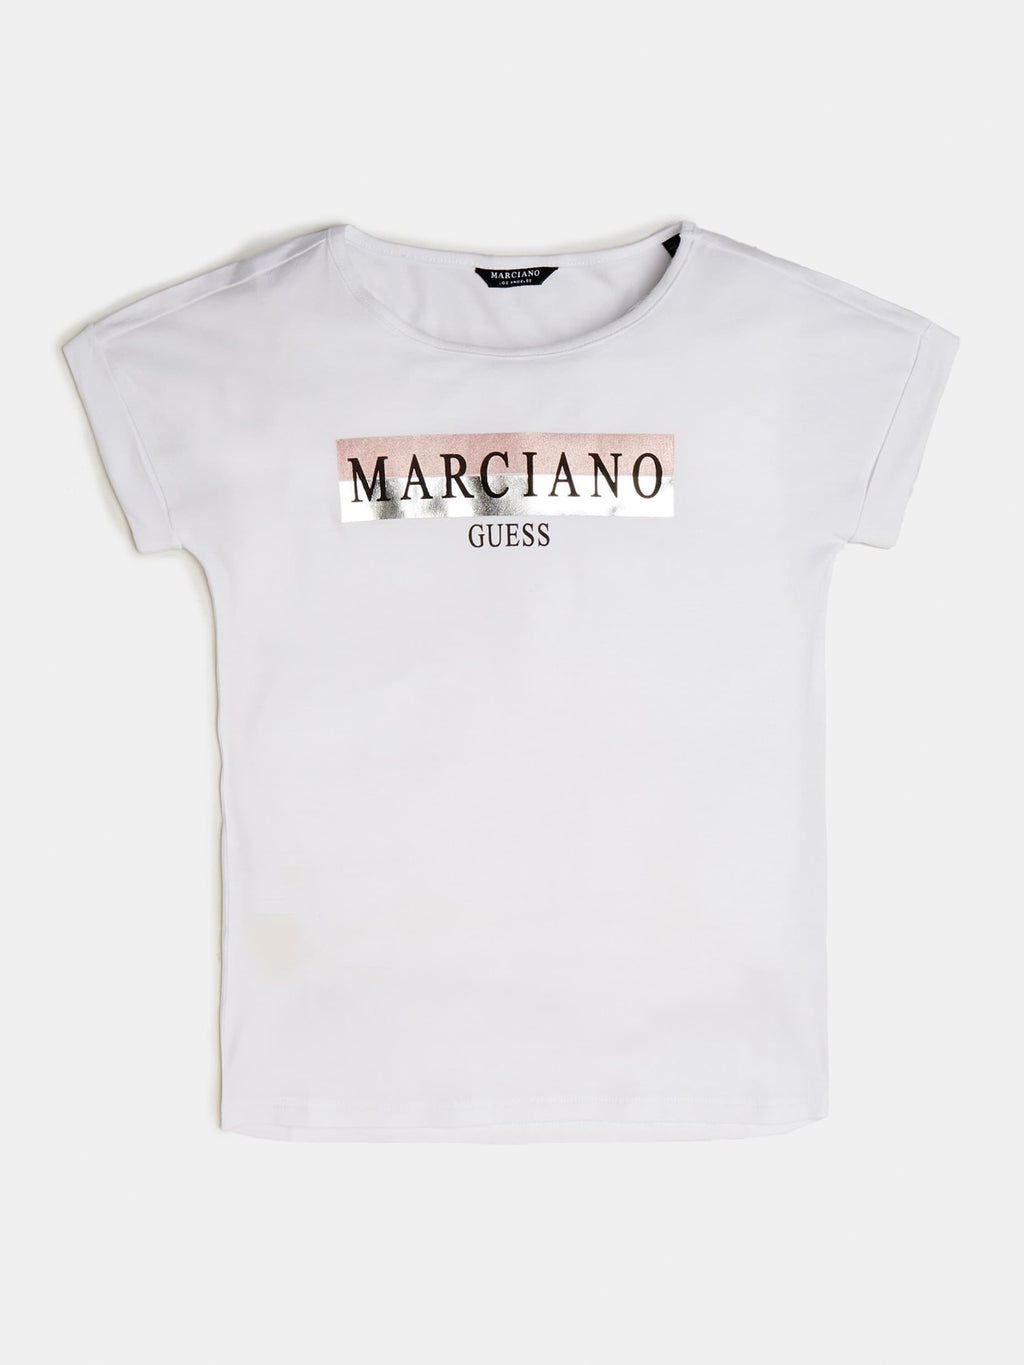 Marciano Foil T-shirt - MamaSmile